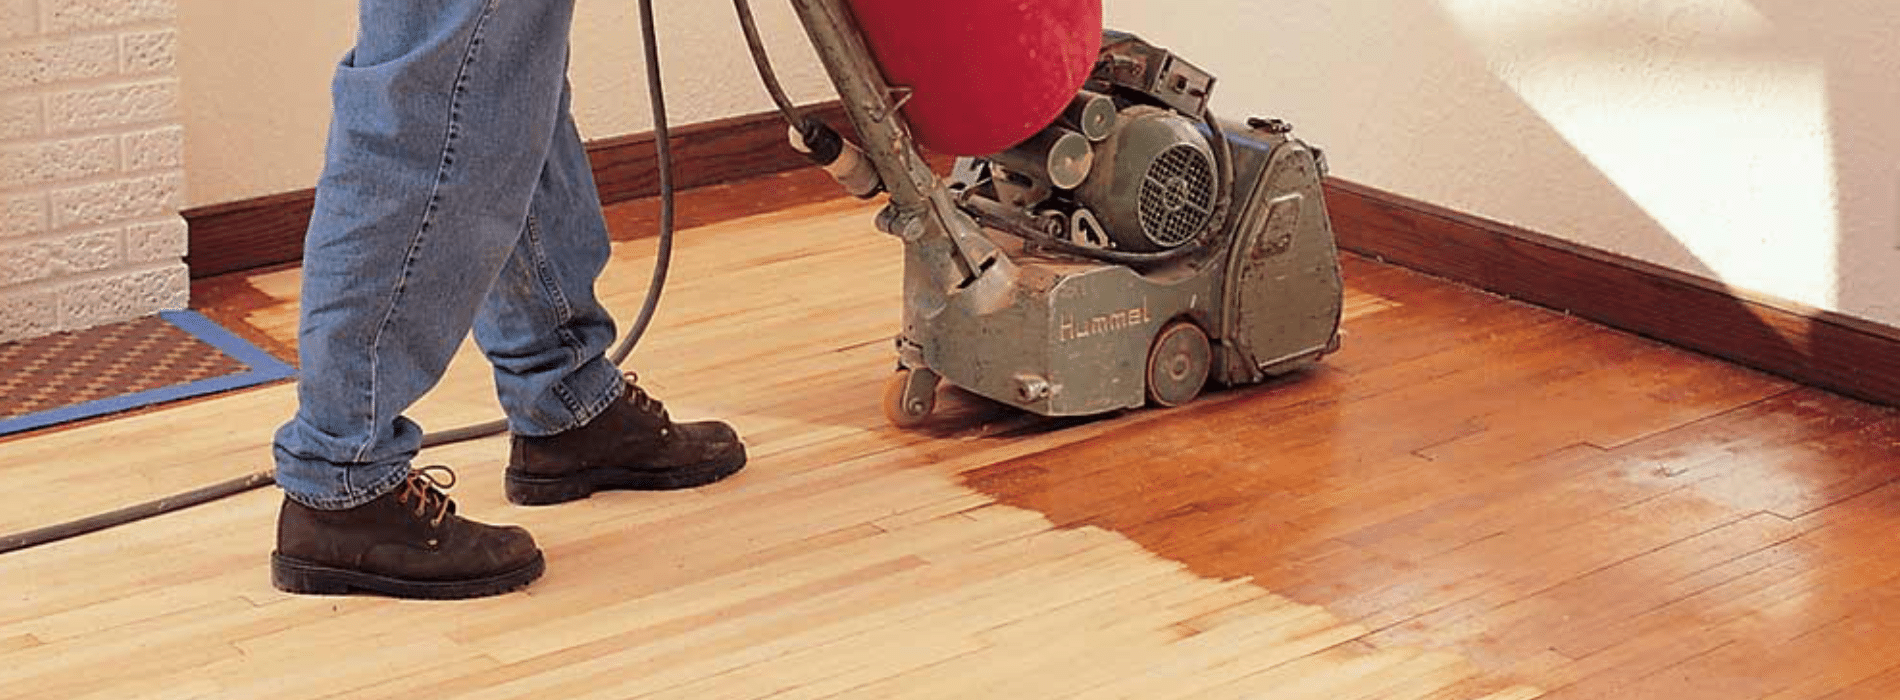 Mr Sander® are using a Bona Scorpion drum sander, measuring 200 mm, with a power output of 1.5 kW. It operates at 240 V and 50 Hz frequency in Rainham, RM13. A dust extraction system with a HEPA filter ensures a clean and efficient sanding process for the herringbone floor. 